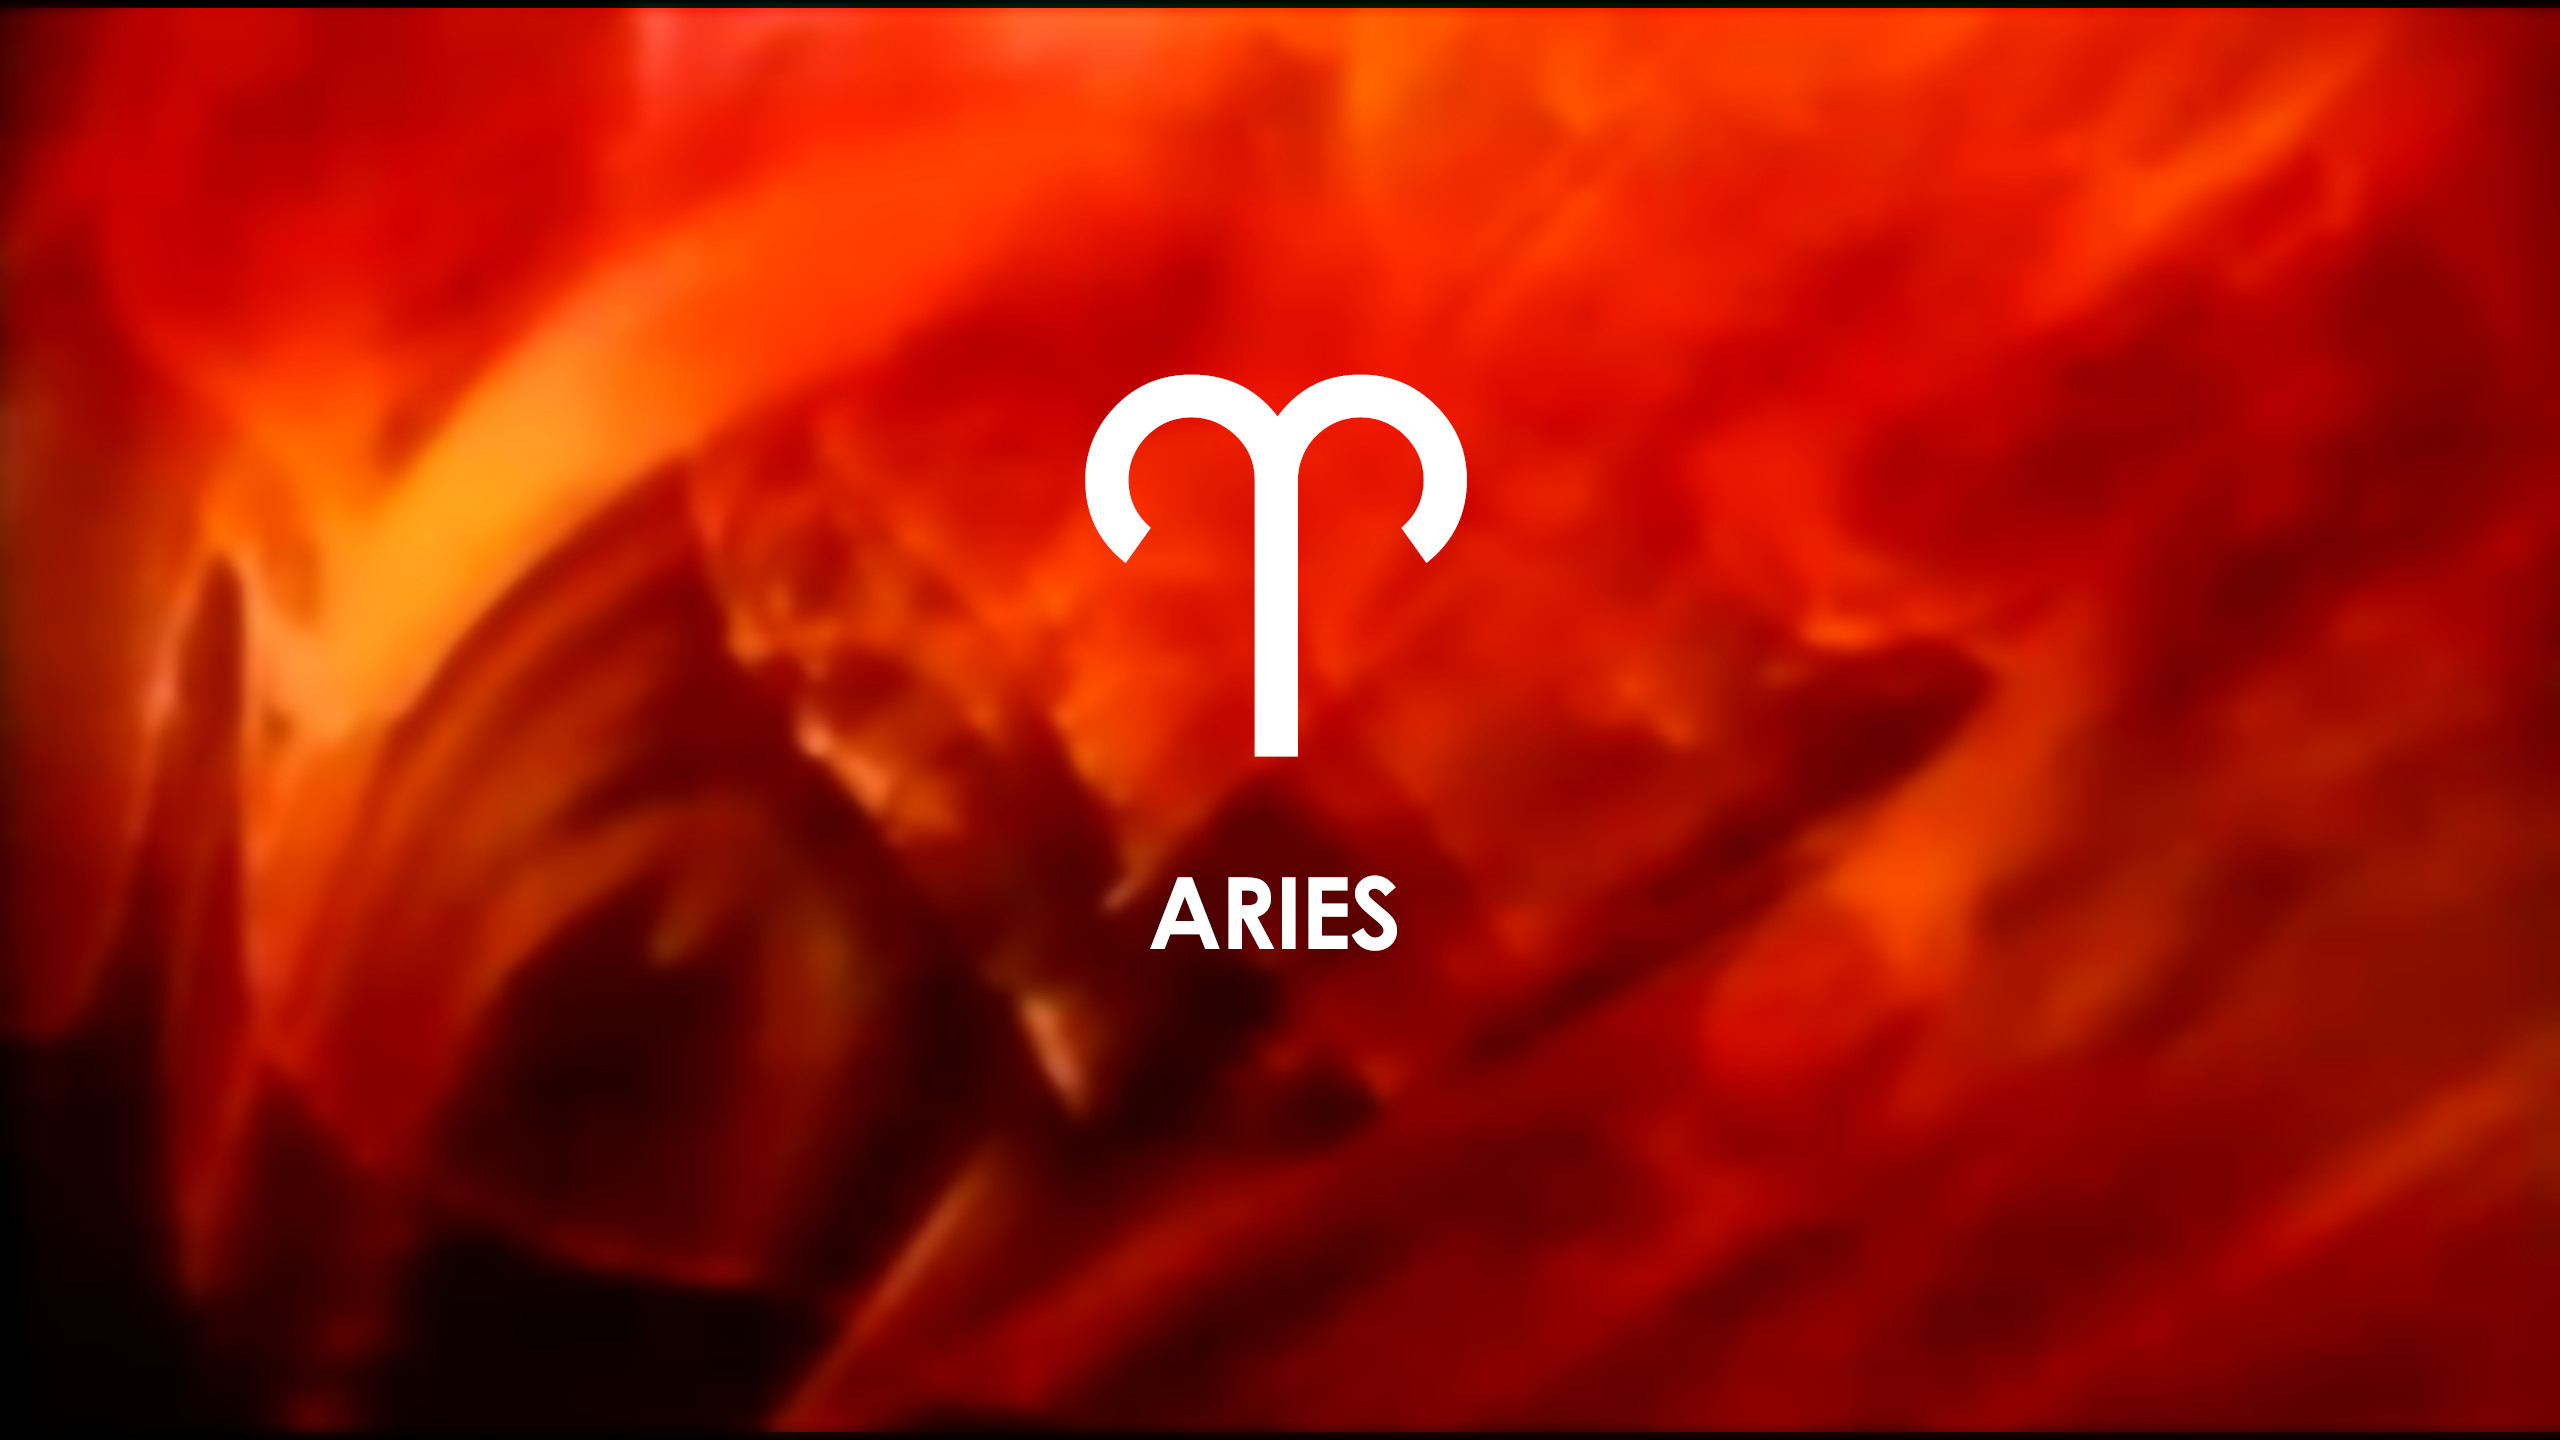 Aries Wallpaper Vector Images over 440